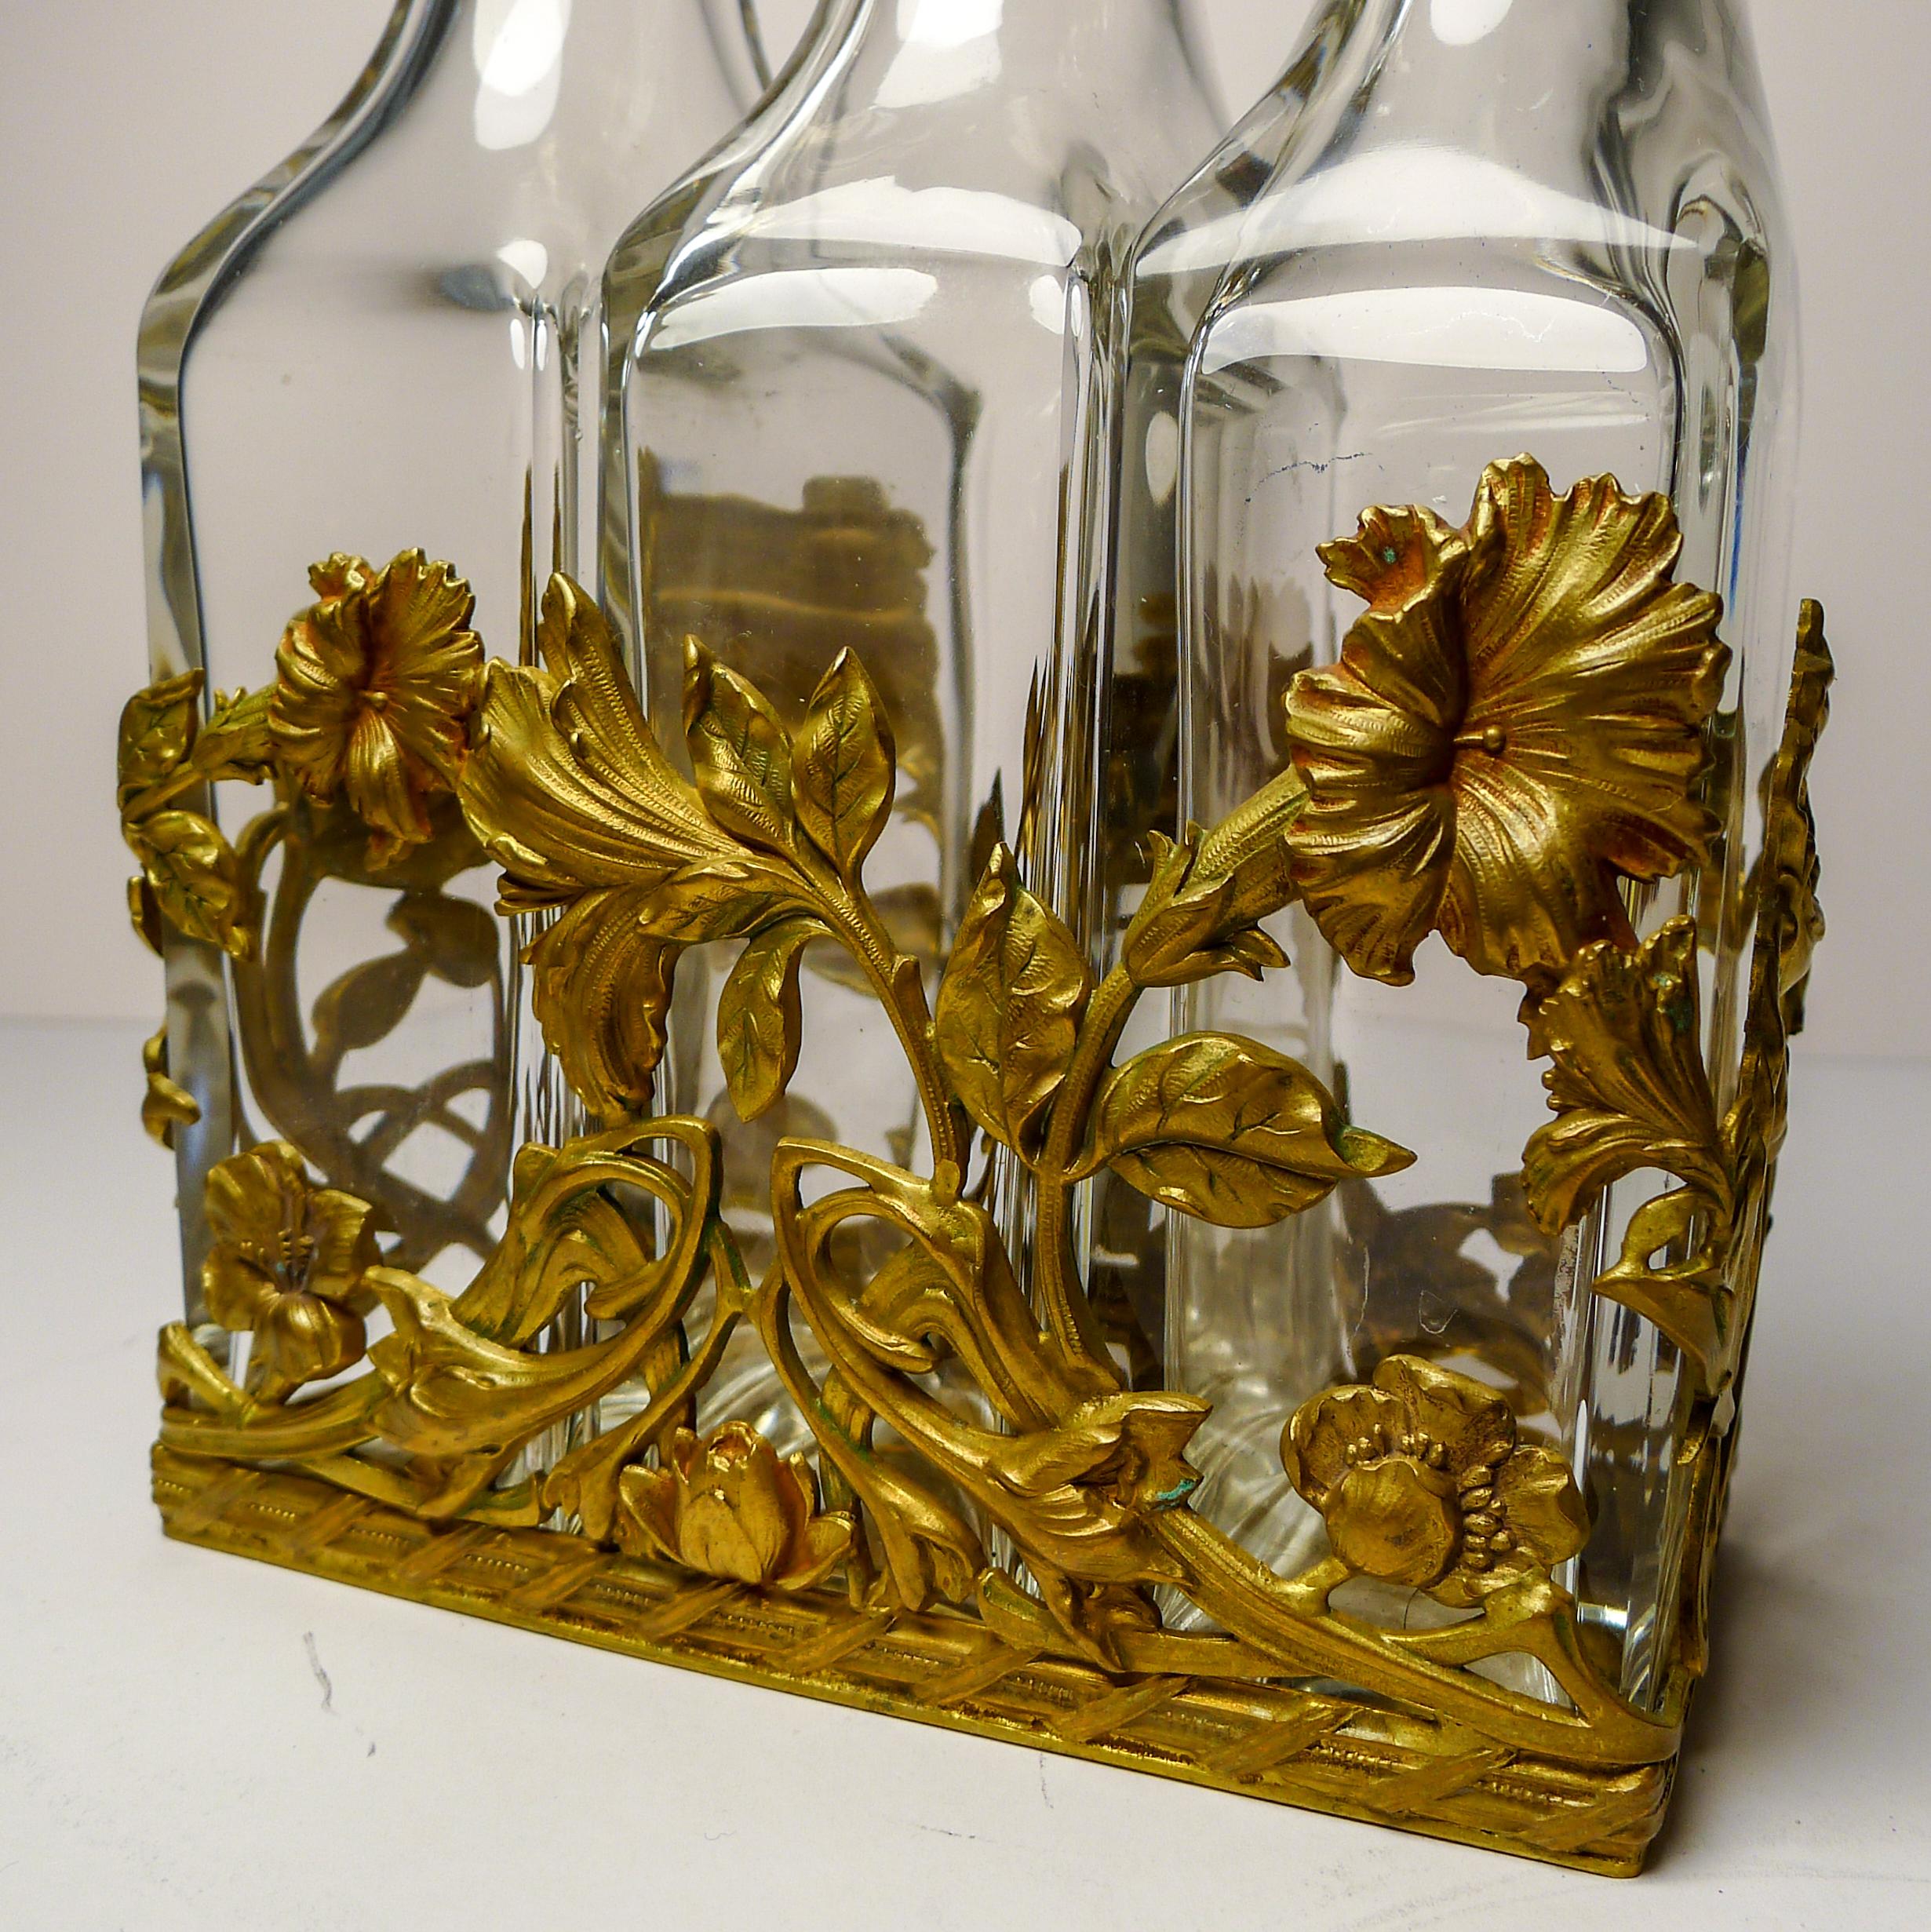 A stunning antique French decanter set; small decanters perhaps for Liqueurs or large scent / perfume bottles - large for concentrated perfume so would have been more for Eau de Toilette / Colognes.

The caddy in which they sit is a wonderful art